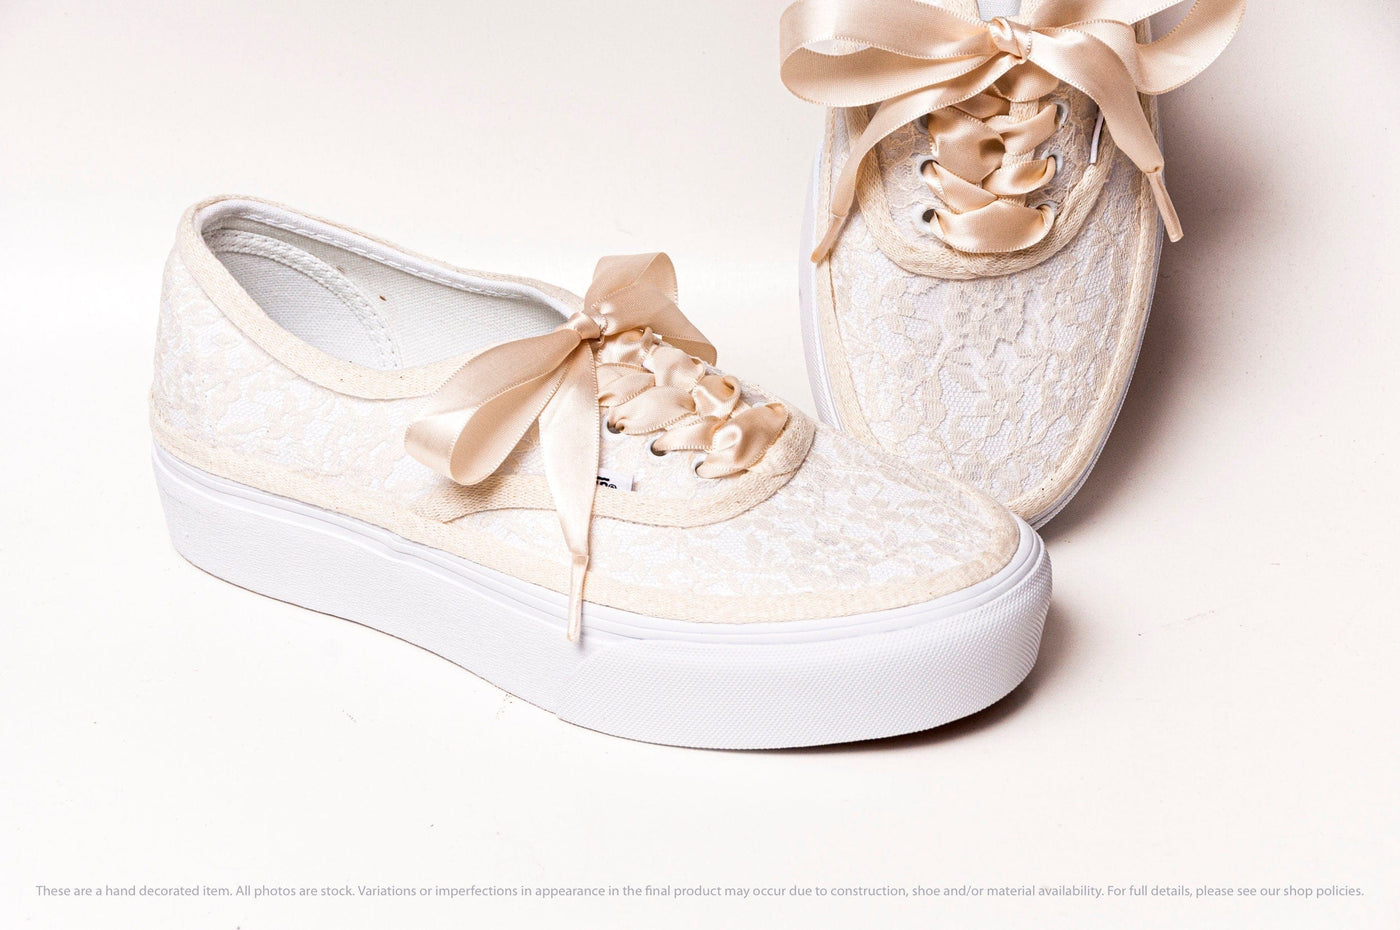 Ivory Lace Over White Sneakers With Platform And Slip On Options 5 / Authentic Platform